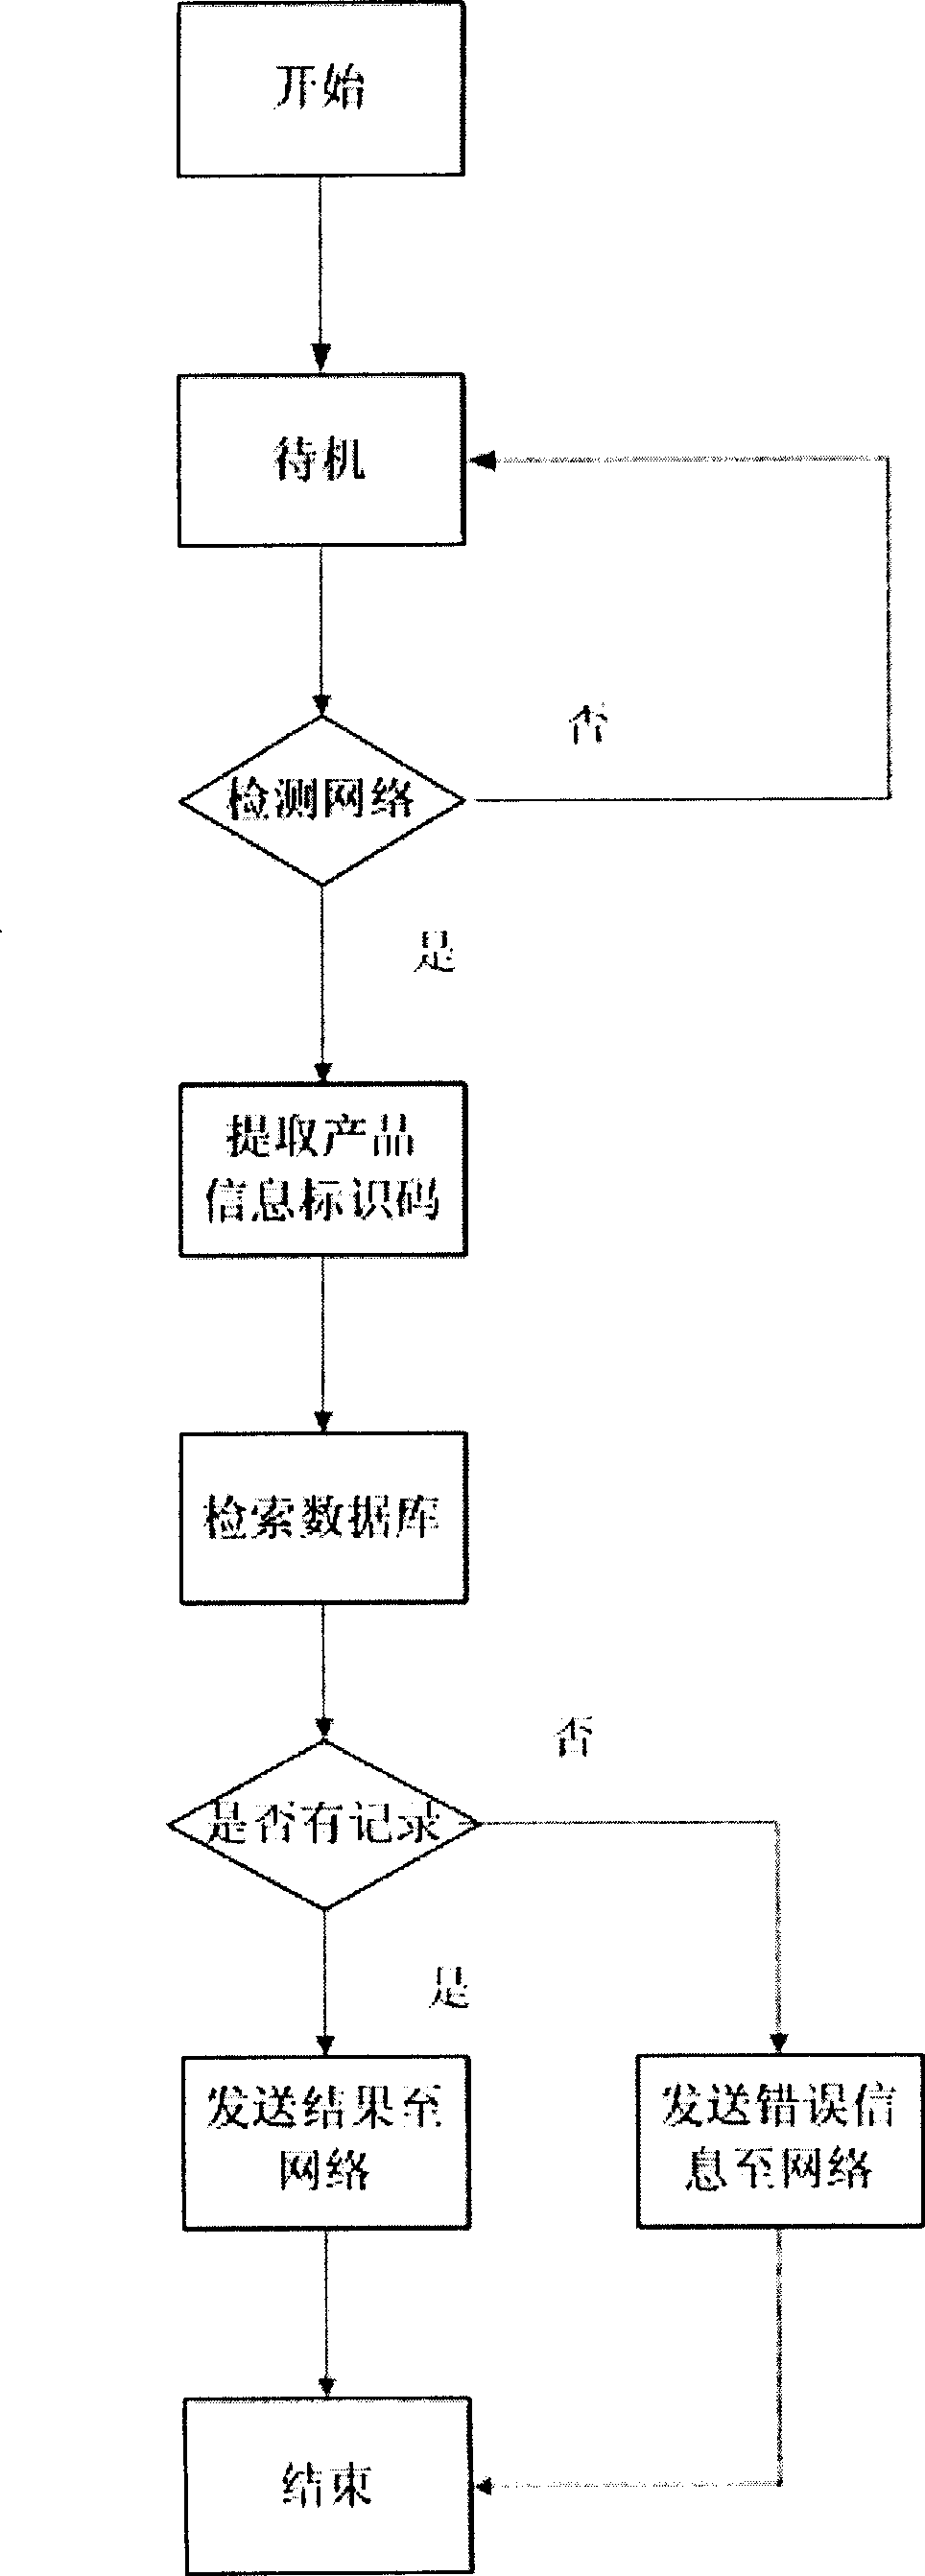 Product sale information management and inquiry system and method